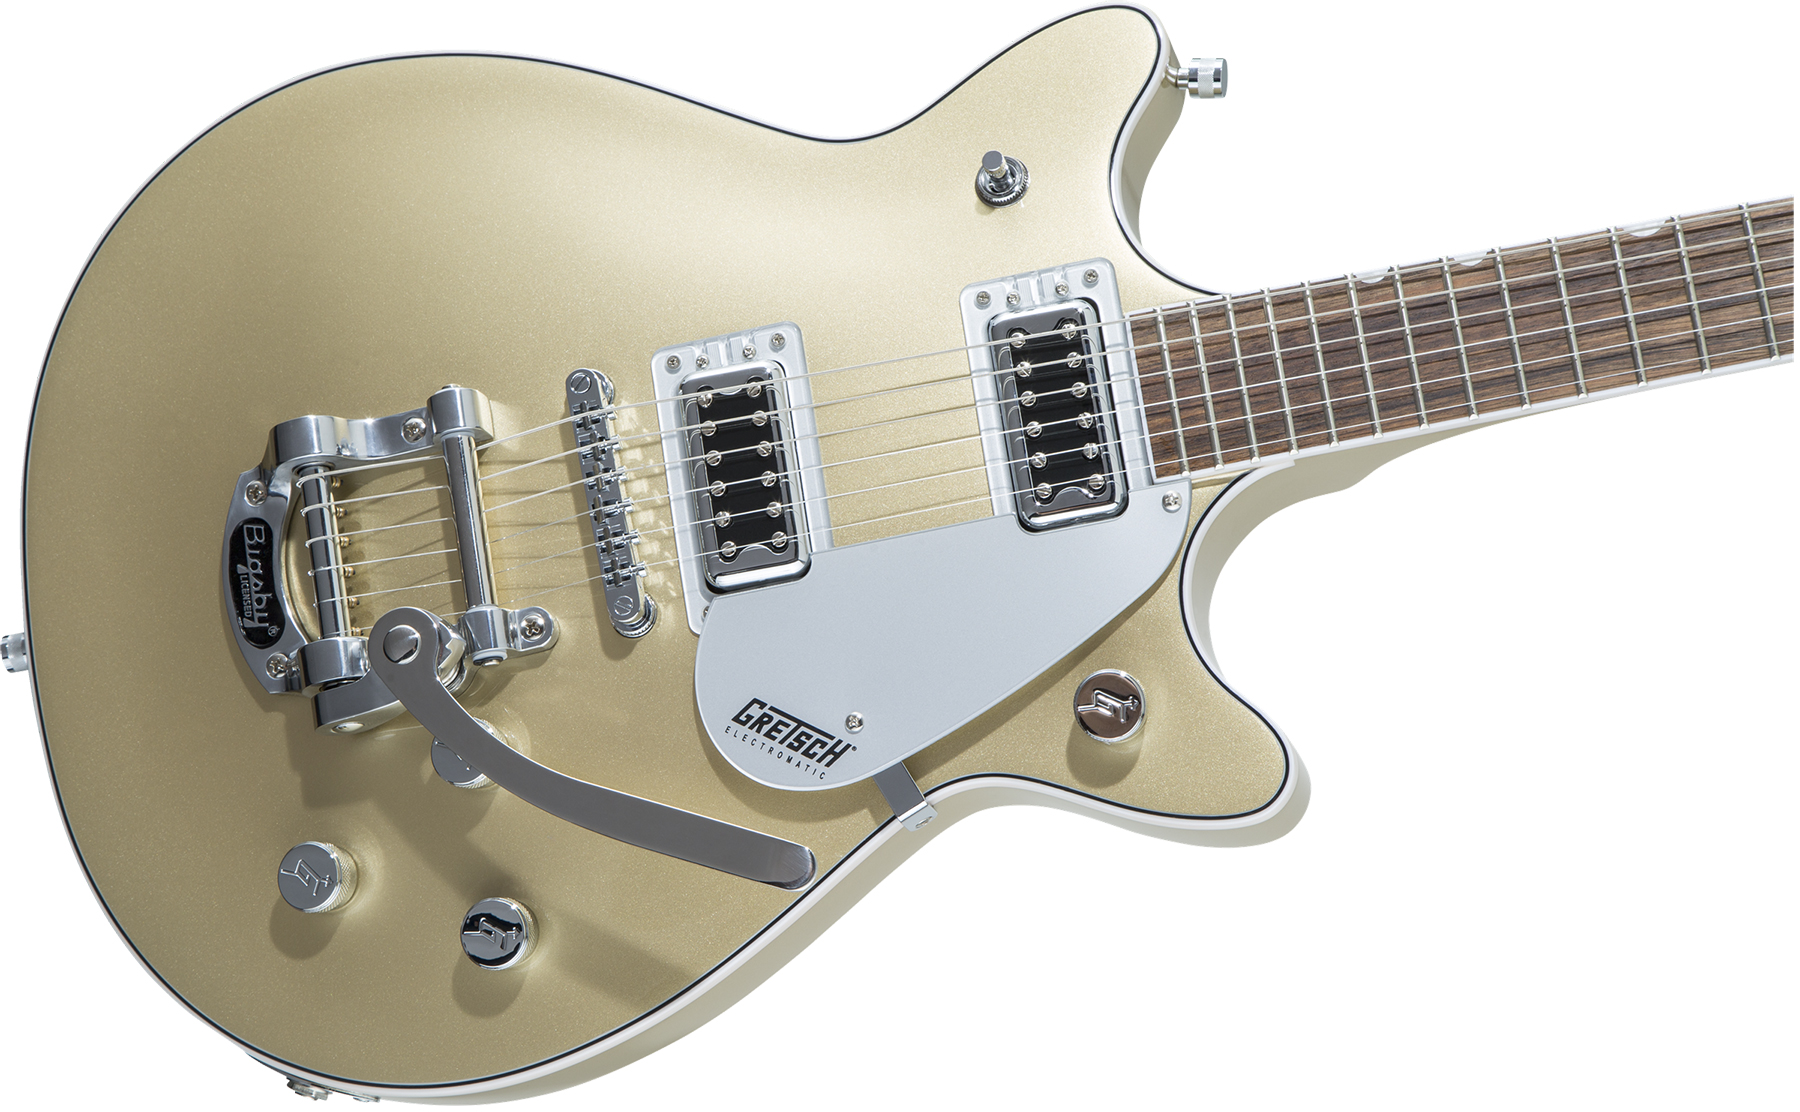 Gretsch G5232t Electromatic Double Jet Ft 2019 Hh Bigsby Lau - Casino Gold - Double cut electric guitar - Variation 2